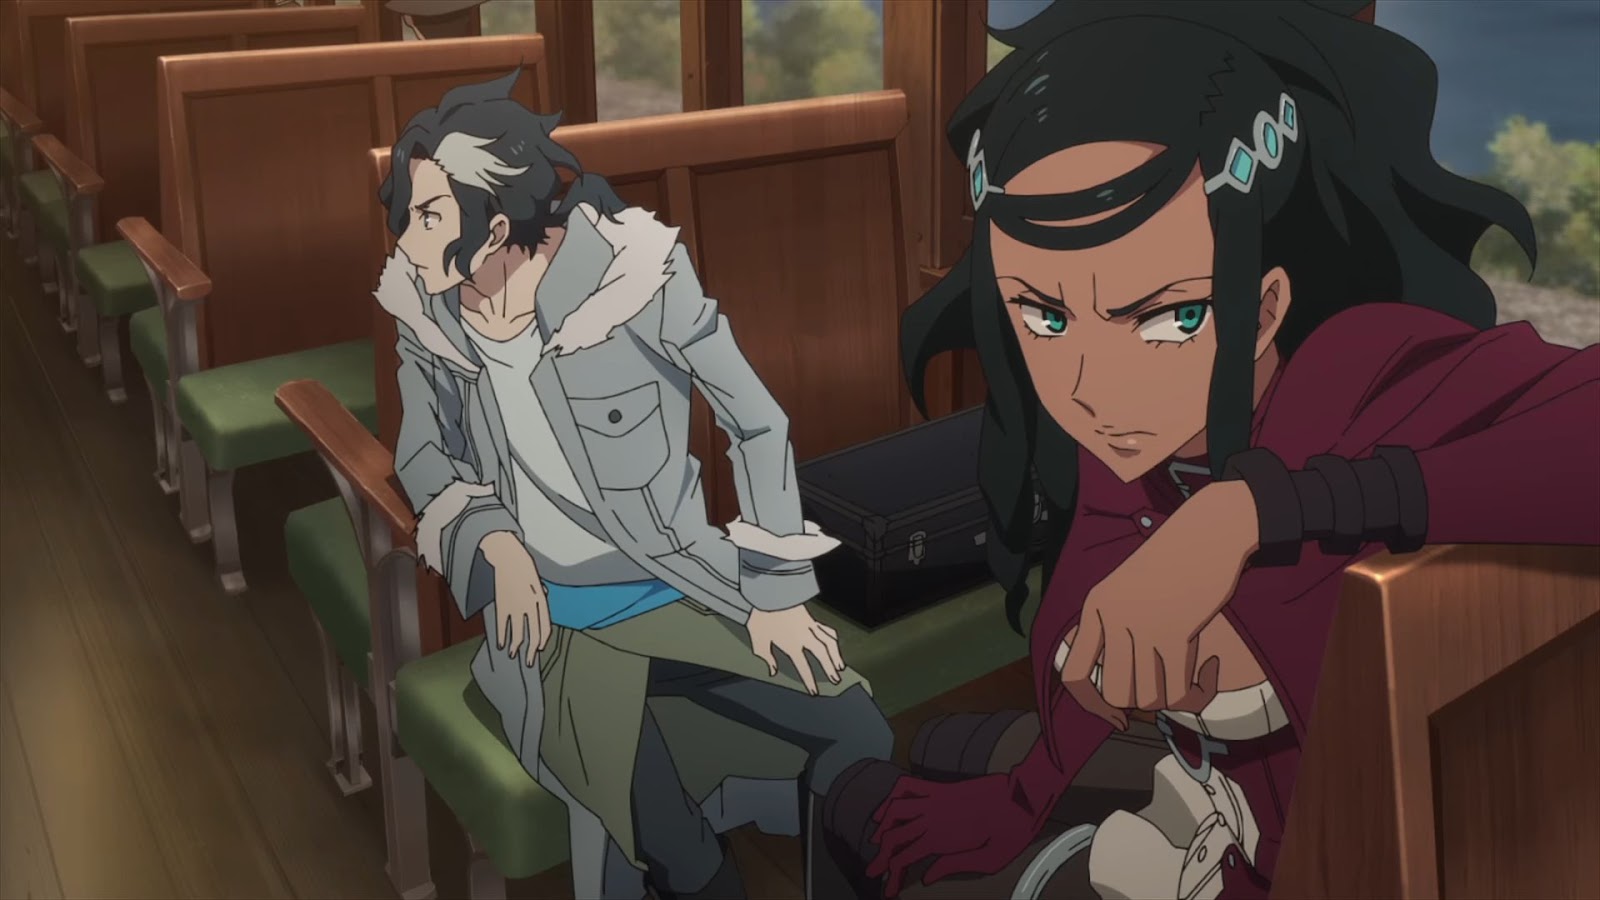 Sirius the Jaeger Episode 1 Review - Yet Another Vampire Anime